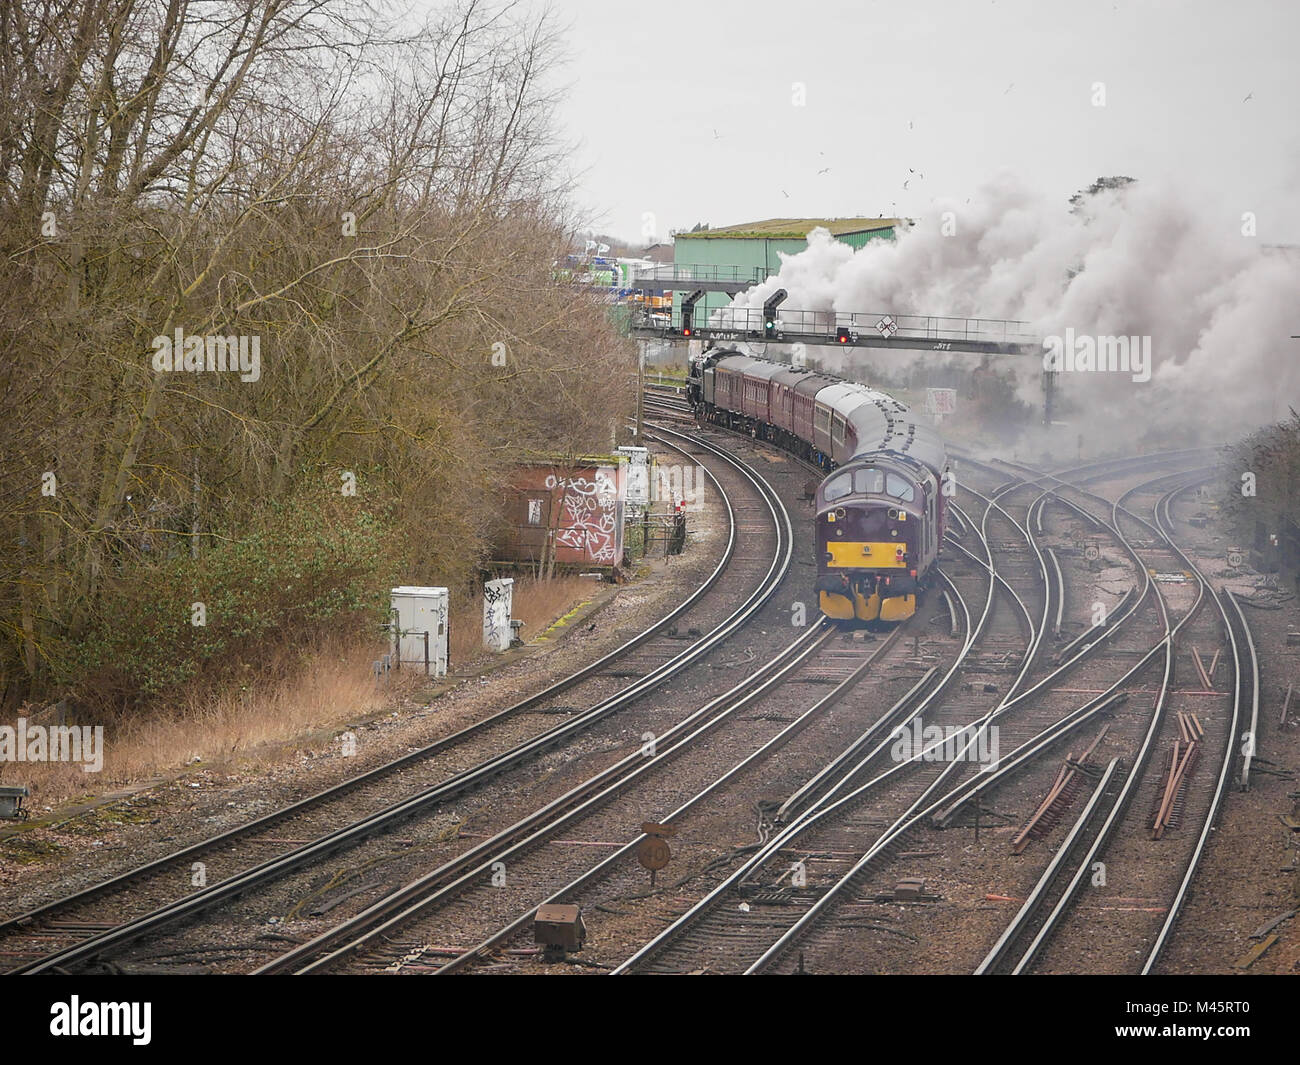 The Cathedrals Express pulled by Oliver Cromwell 70013 locomotive passes through Ashford International Train Station, Kent, UK Stock Photo